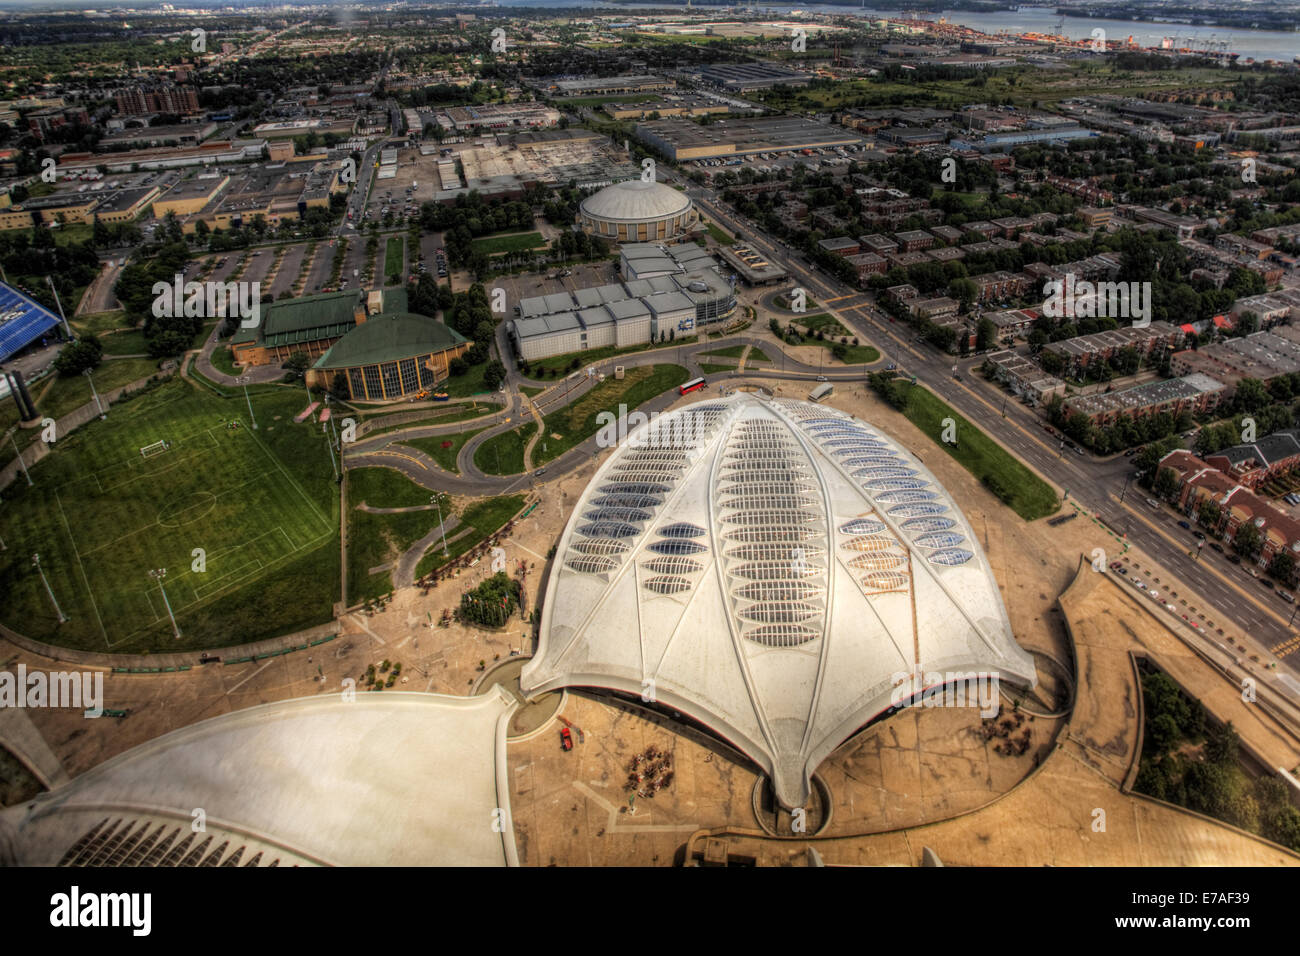 An aerial view of the Biodome in Montreal, Quebec, Canada Stock Photo